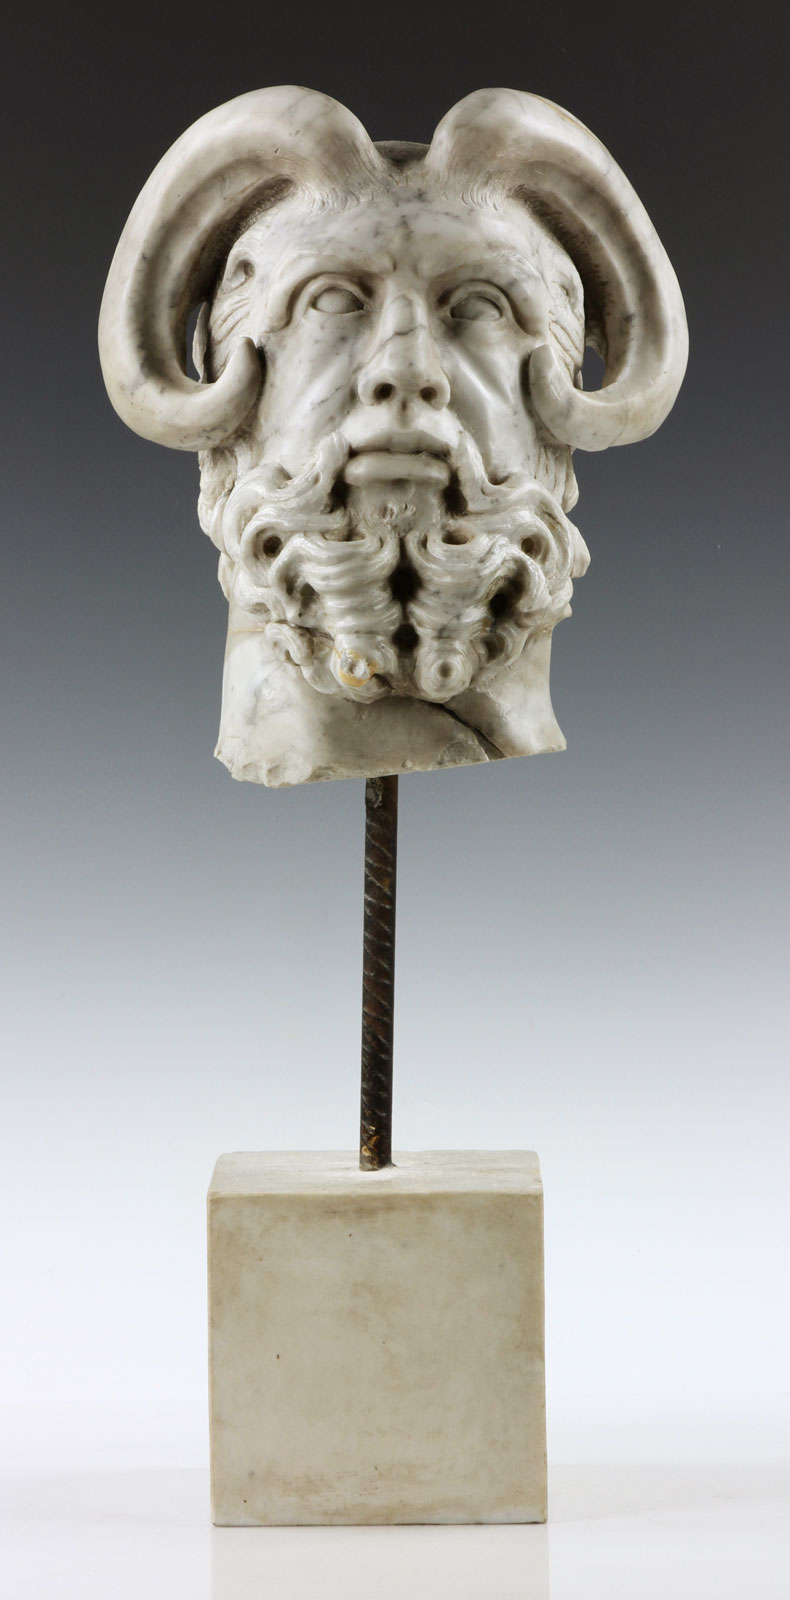 19th century or earlier carved marble head of a mythological figure from a Rome, Italy estate.